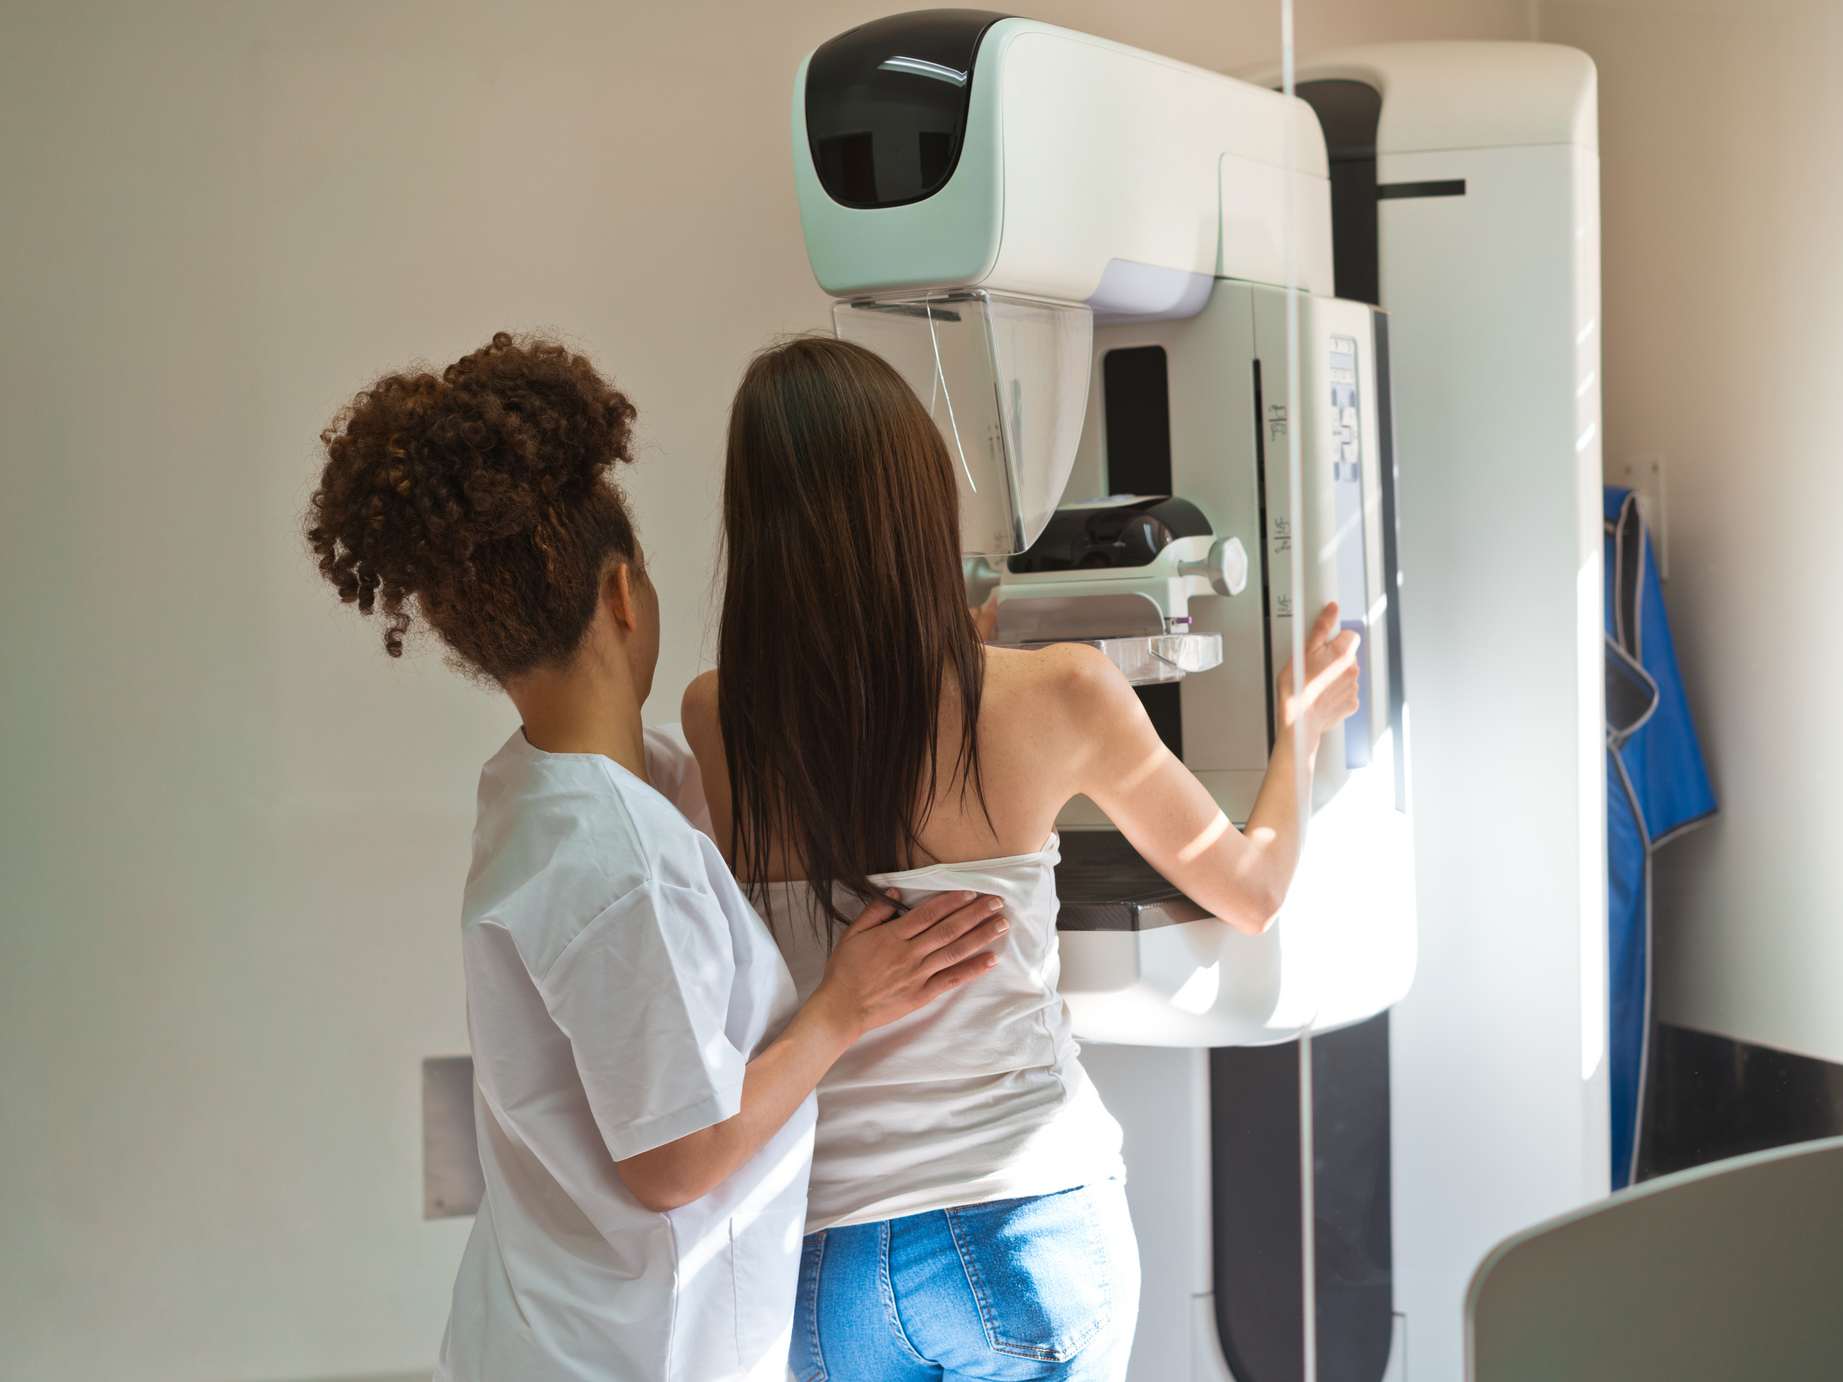 The new guidelines were prompted by increased rates of breast cancer in women in their 40s. They recommend mammograms every other year, starting at age 40.